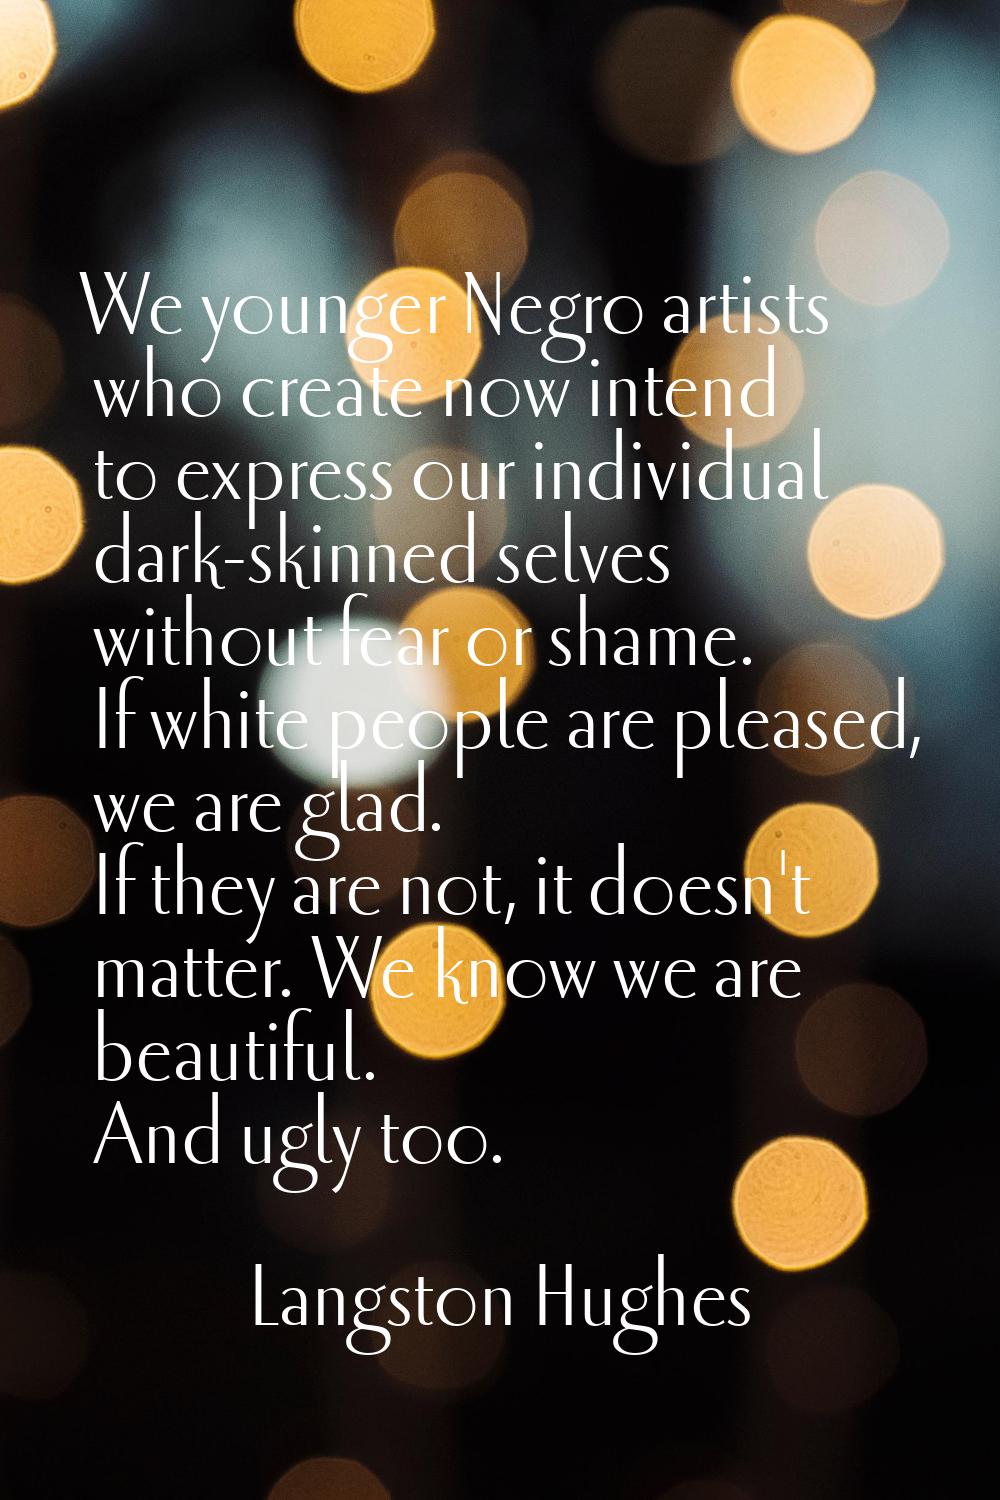 We younger Negro artists who create now intend to express our individual dark-skinned selves withou